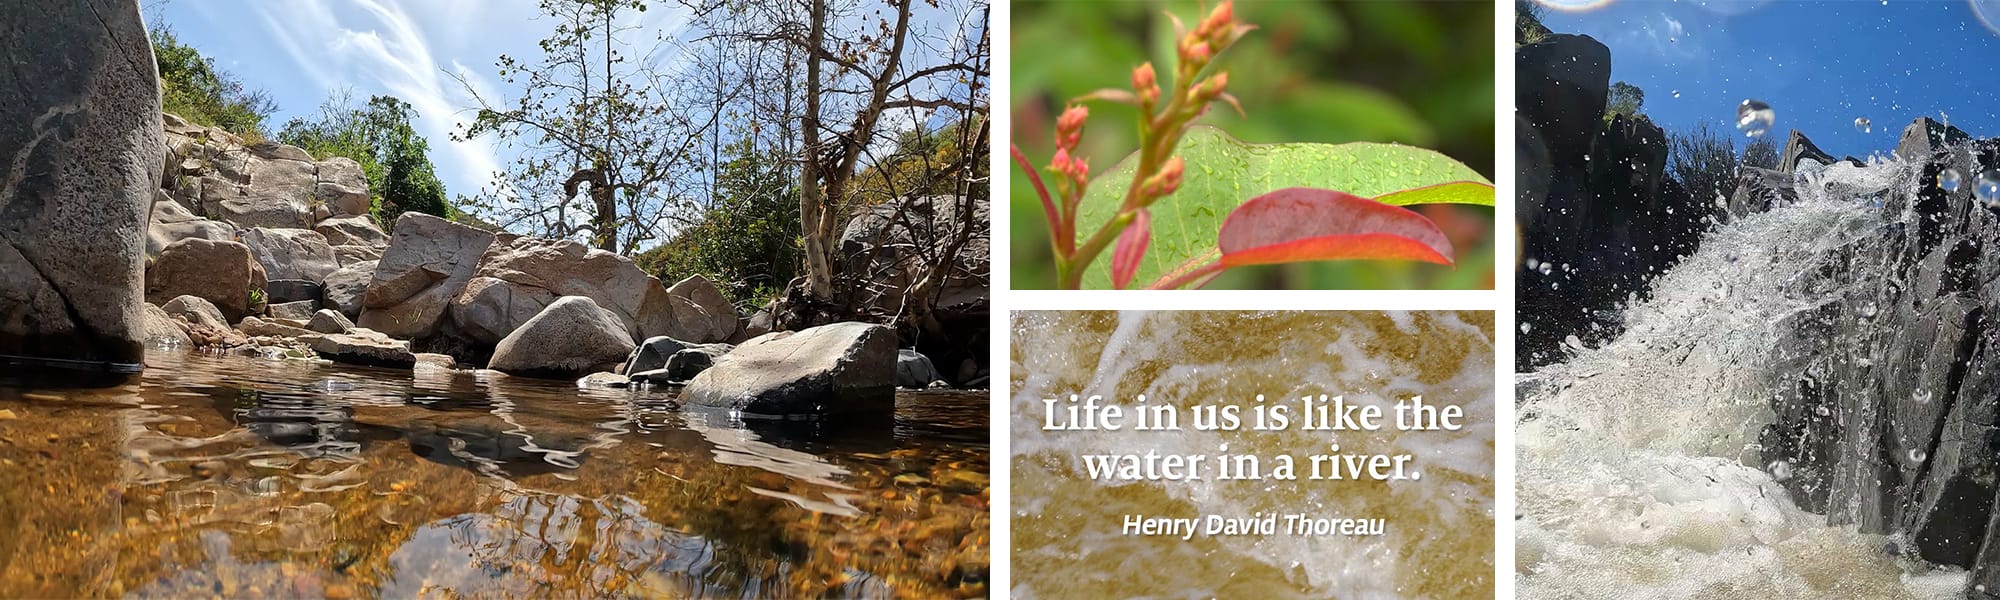 Life in us is like the water in a river. -- Henry David Thoreau